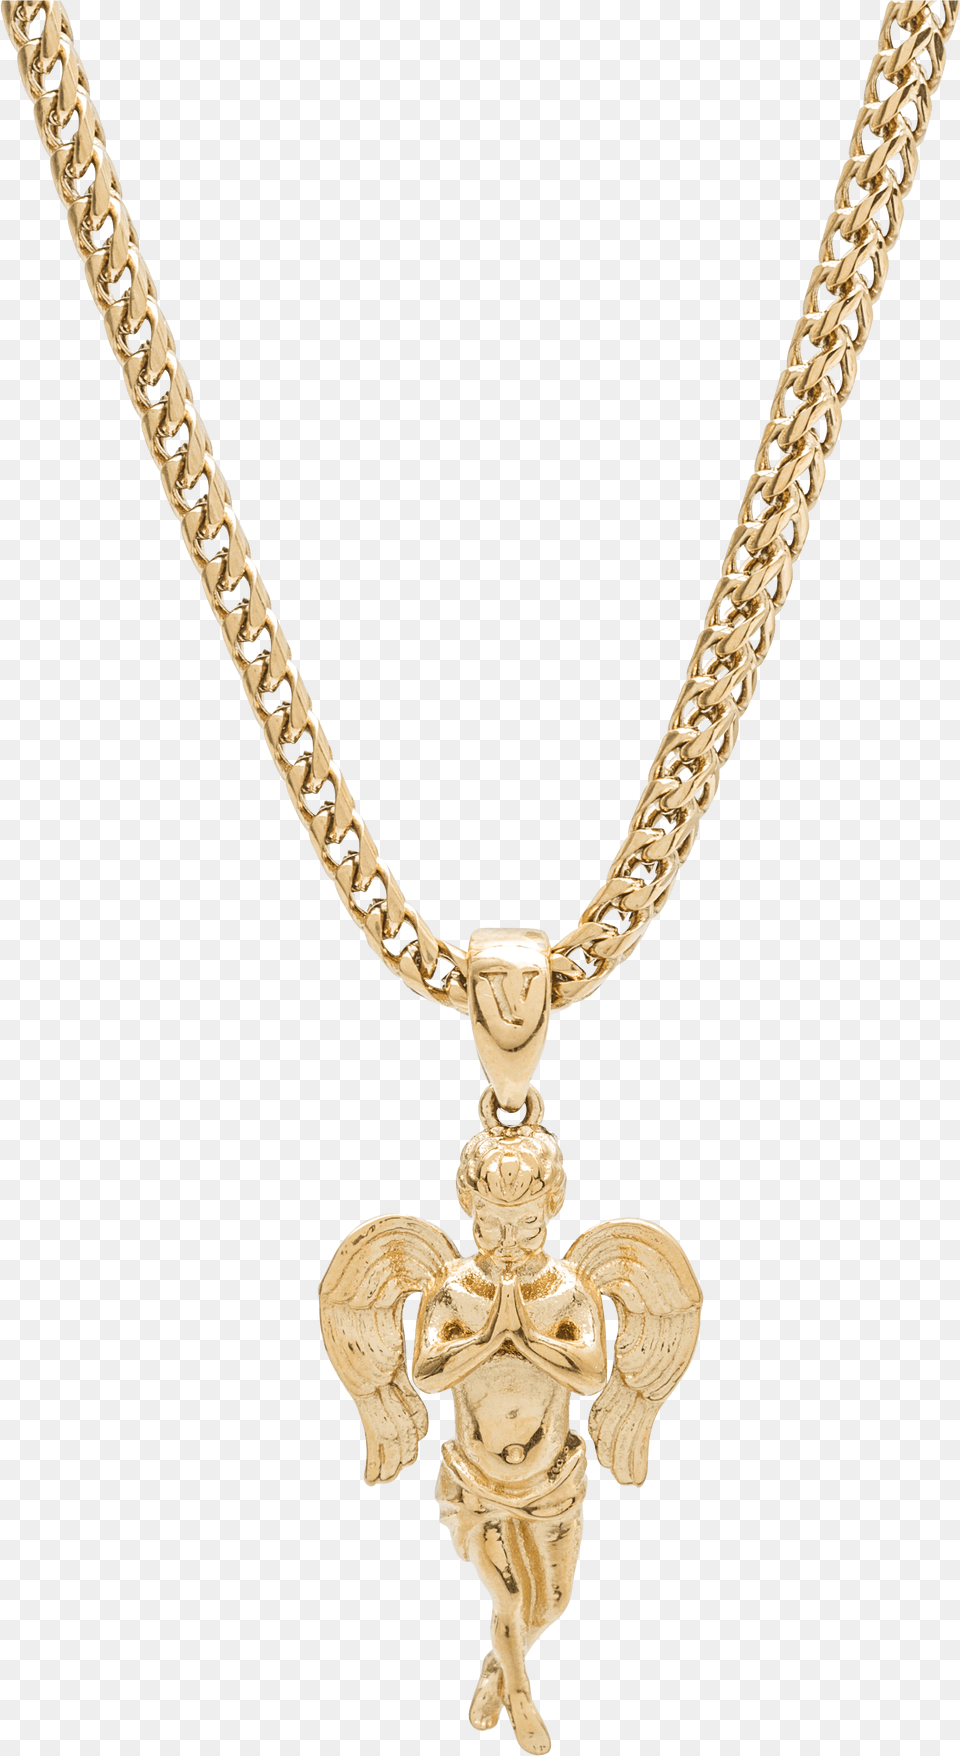 Gucci Silver Pendant Necklace, Accessories, Jewelry, Gold Png